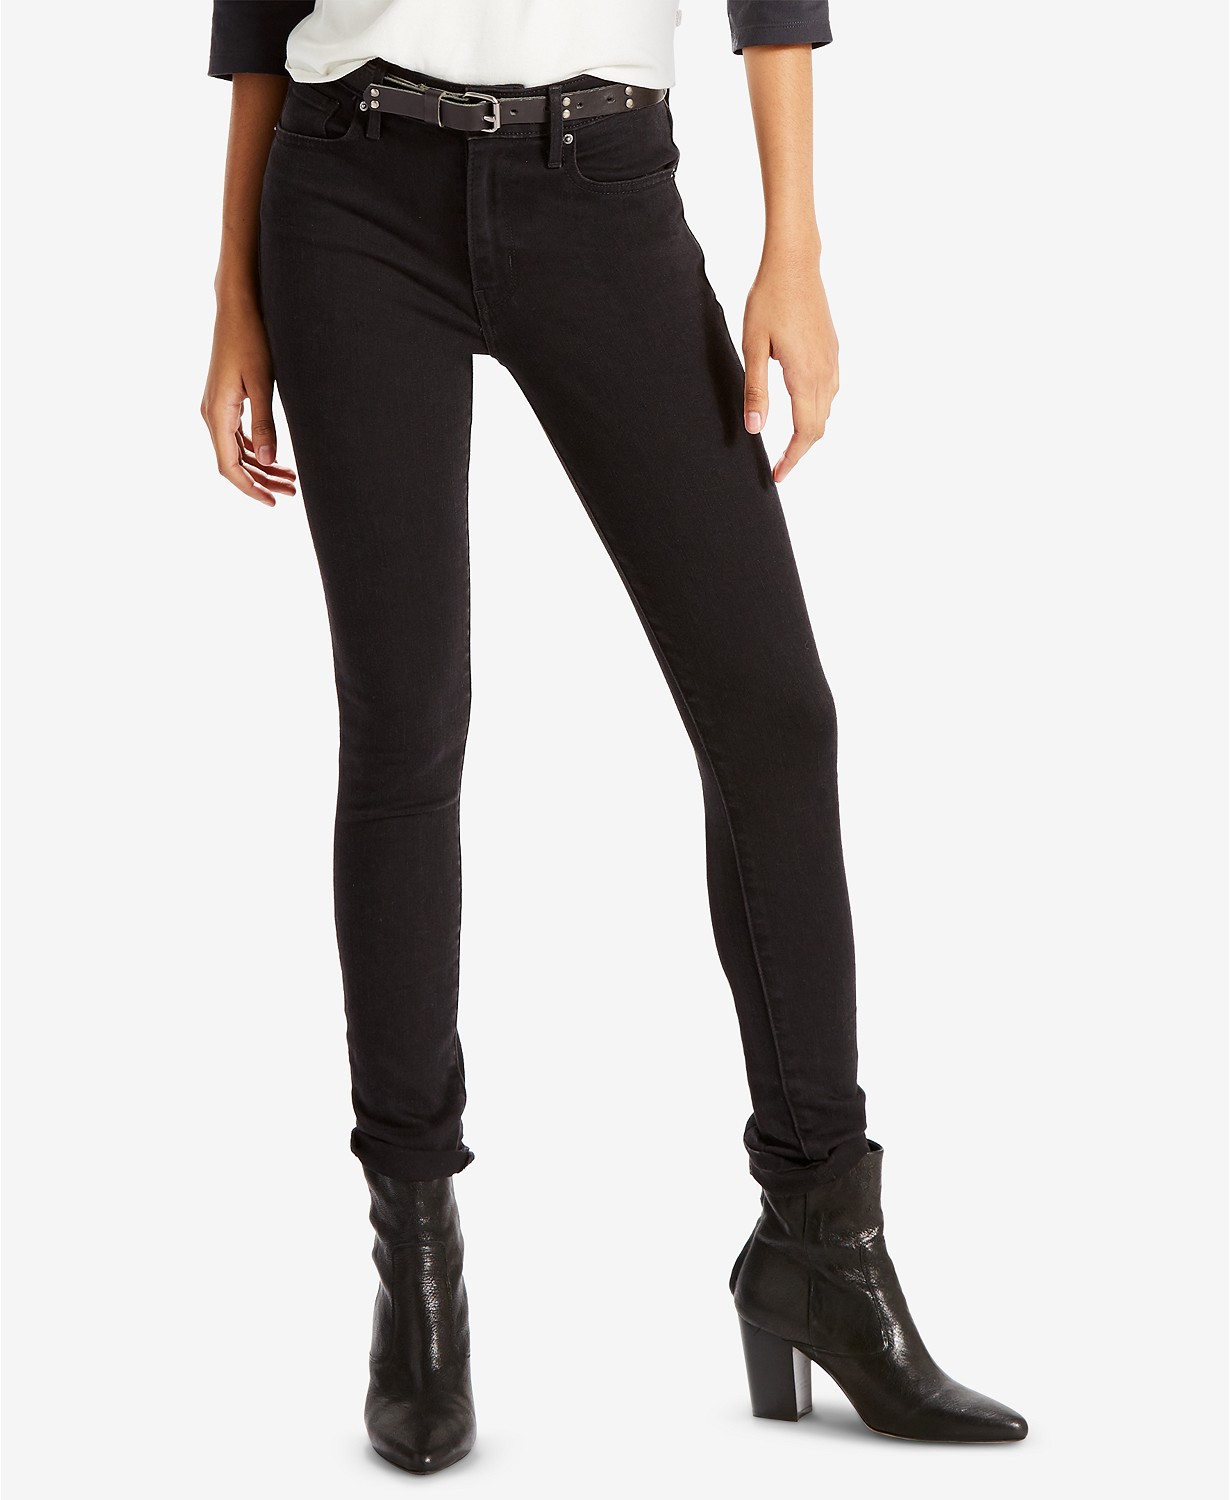 Womens 721 High-Rise Skinny Jeans in Long Length